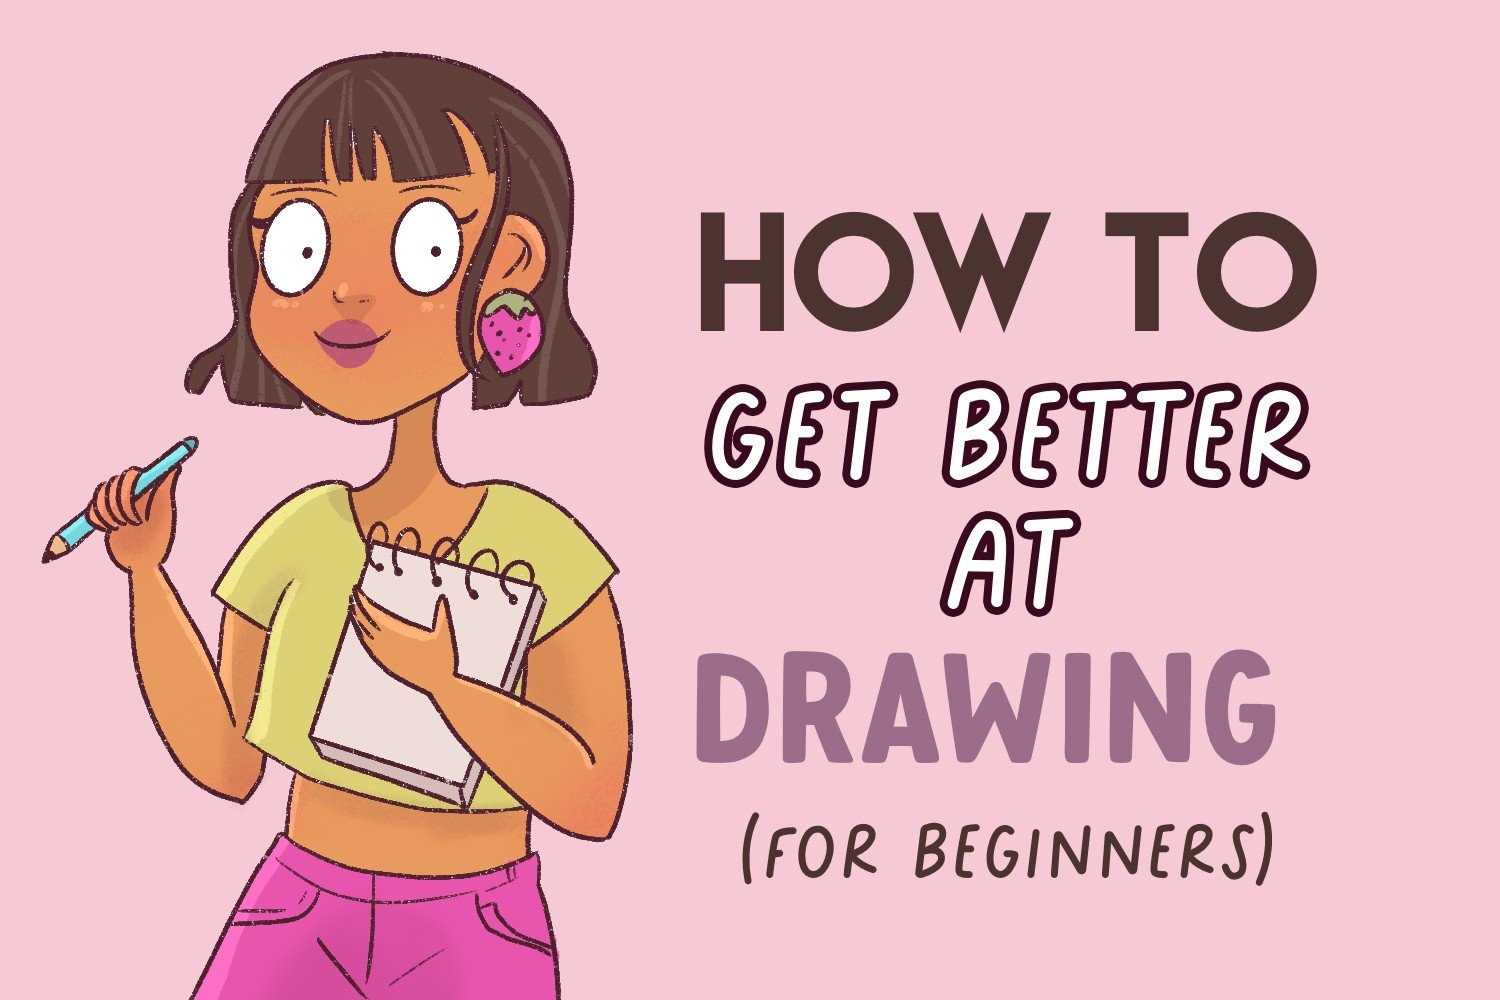 How to get Better at Drawing (for Beginners) Draw Cartoon Style!